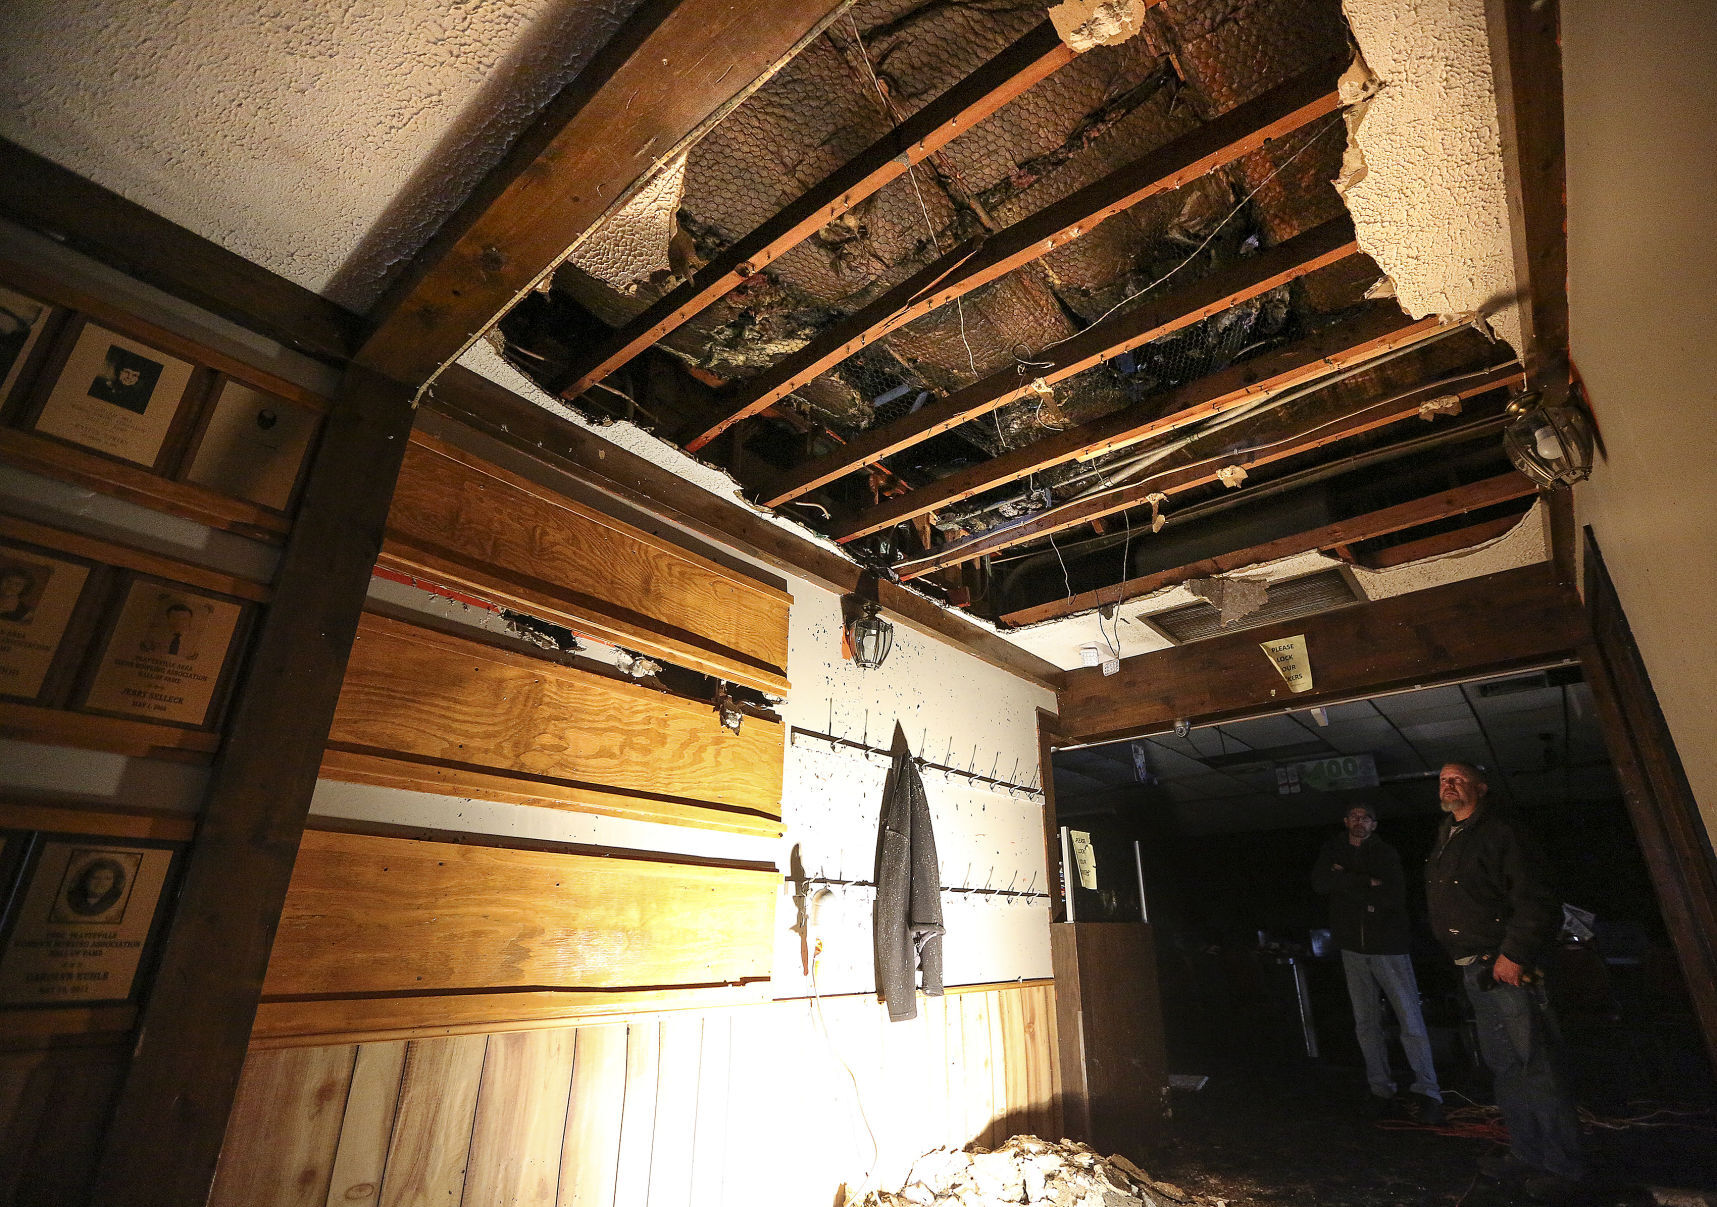 Damage from fire can be seen on the ceiling of Pioneer Lanes Bar, Grill & Banquet Center in Platteville, Wis., on Sunday. PHOTO CREDIT: Dave Kettering